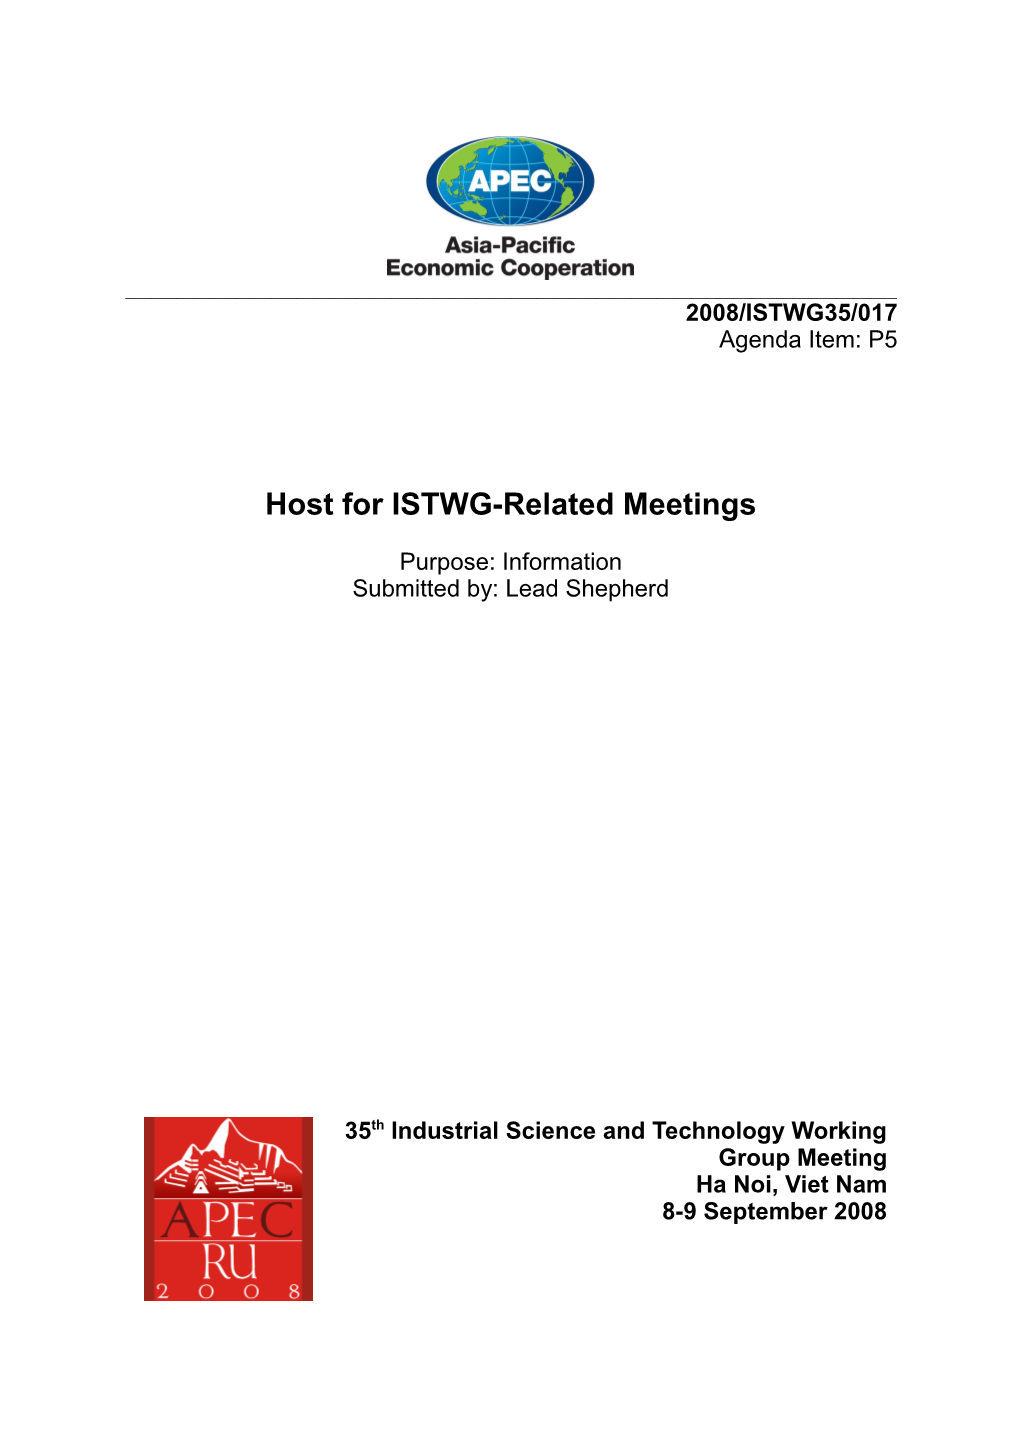 Host for ISTWG-Related Meetings